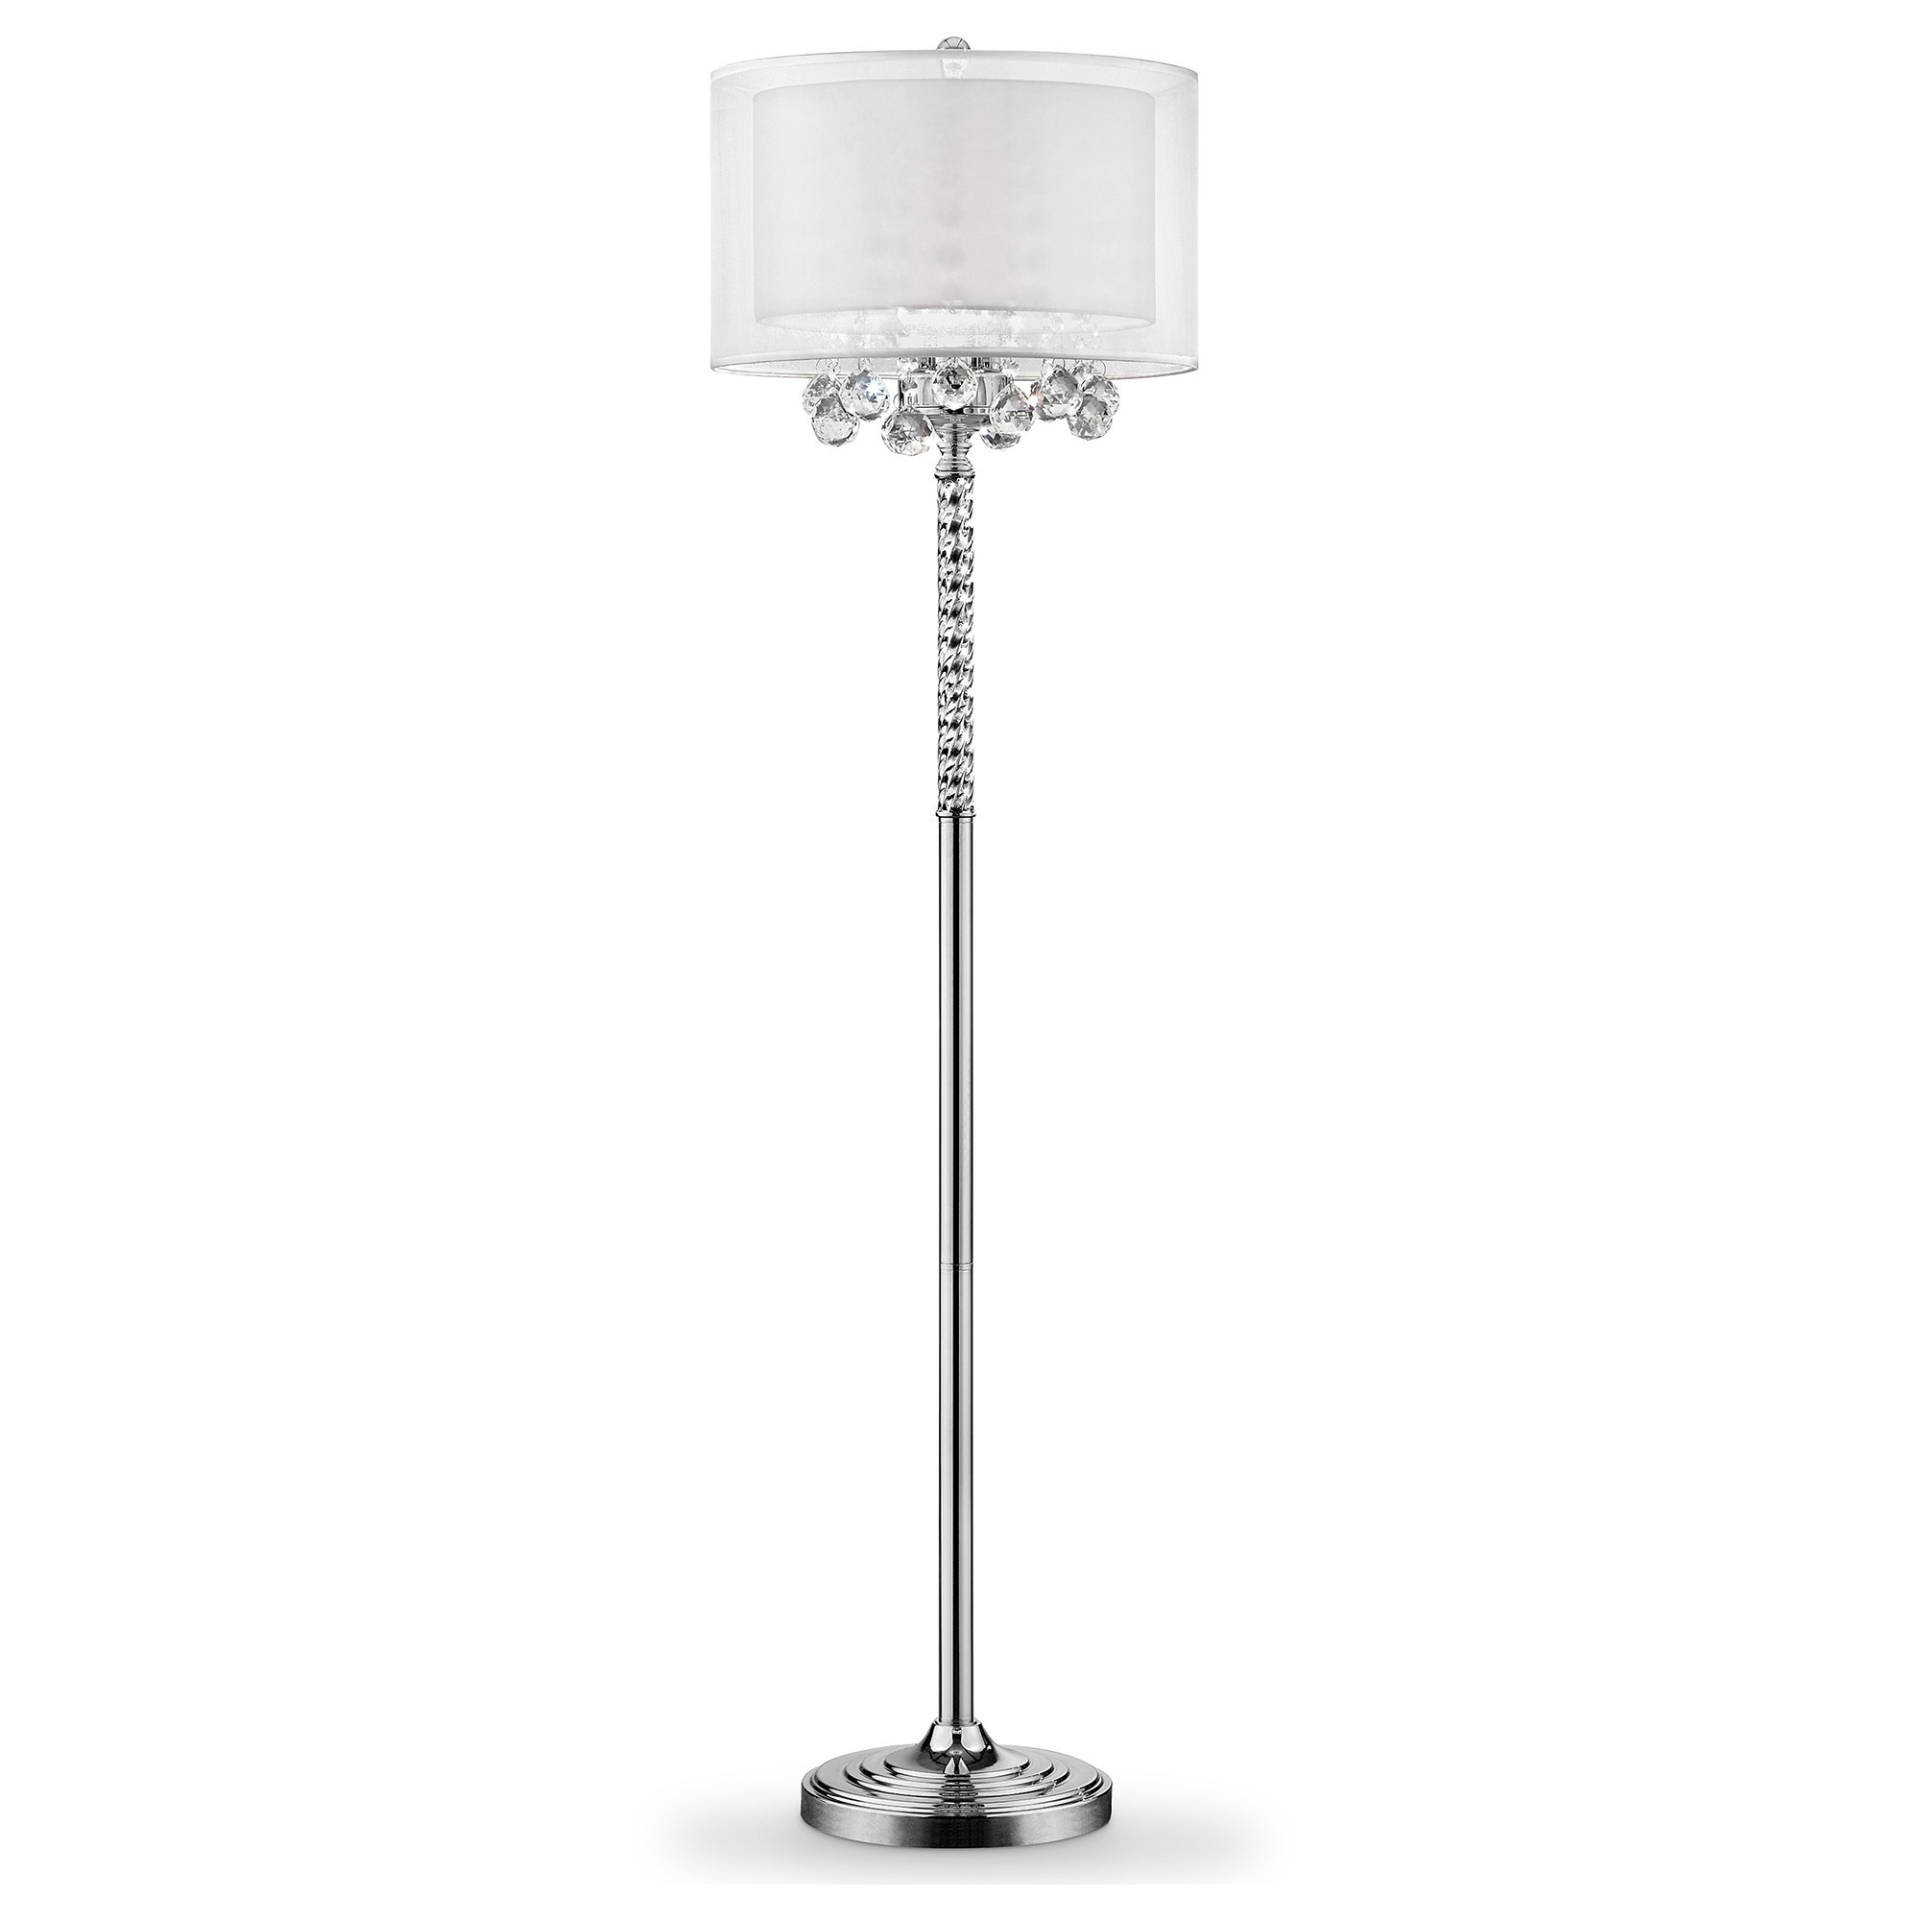 Sleek Three Light Candelabra Floor Lamp with White Shade & Crystal Accents (62.5"H)